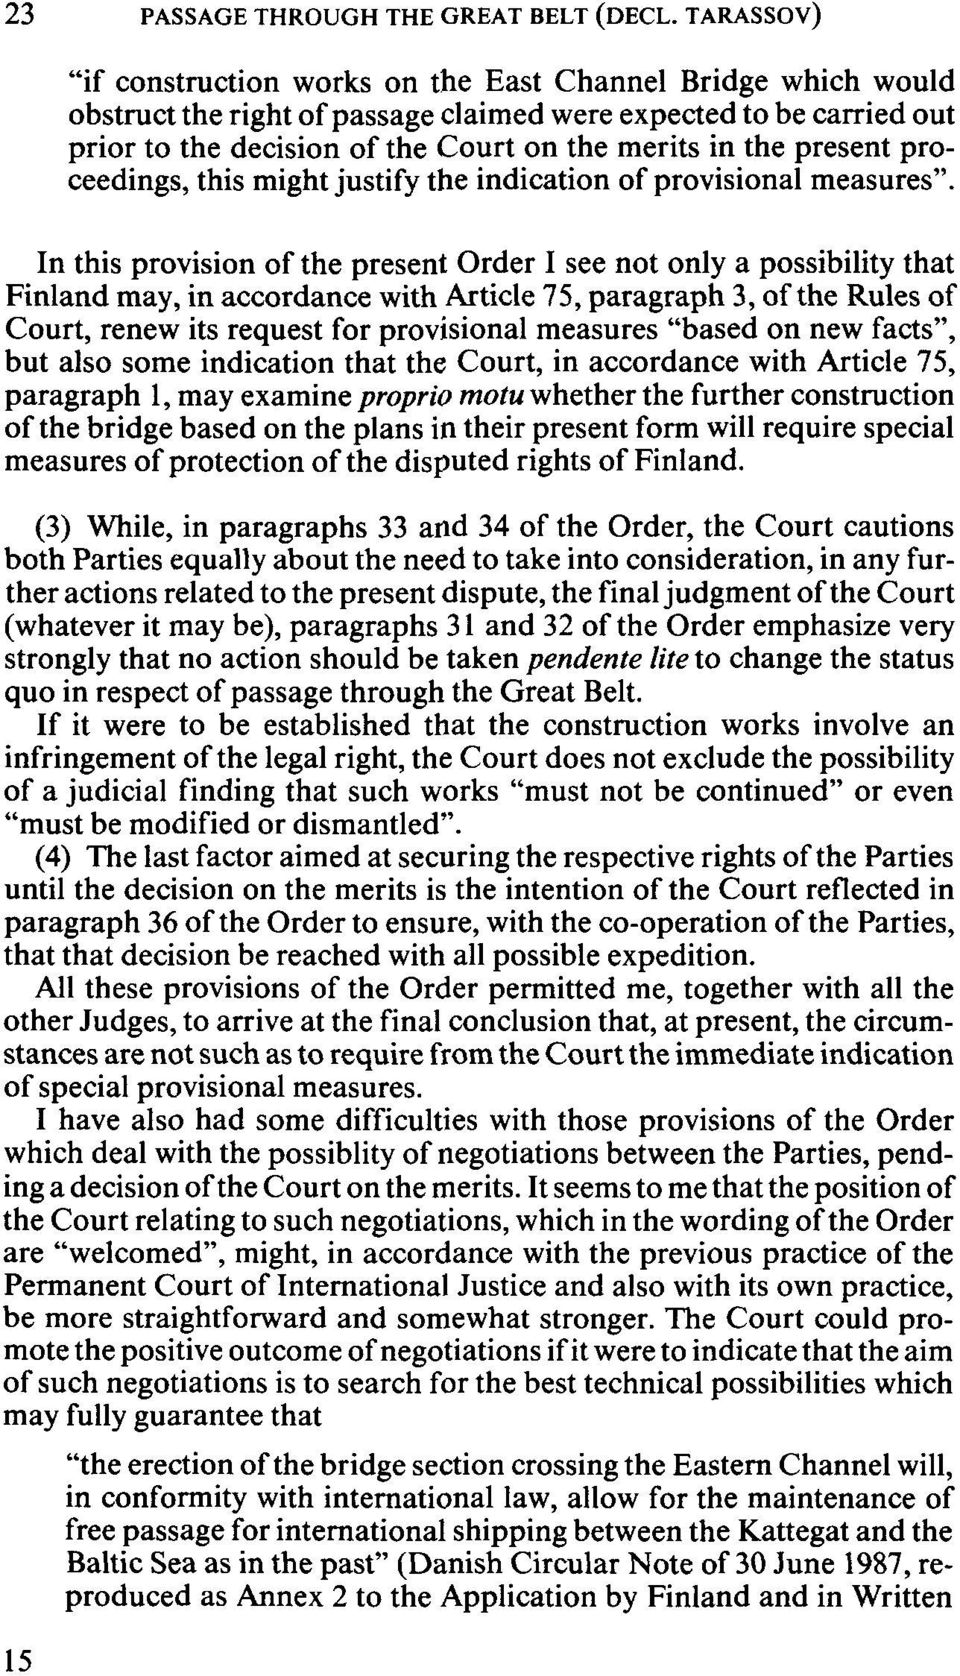 In this provision of the present Order 1 see not only a possibility that Finland may, in accordance with Article 75, paragraph 3, of the Rules of Court, renew its request for provisional measures